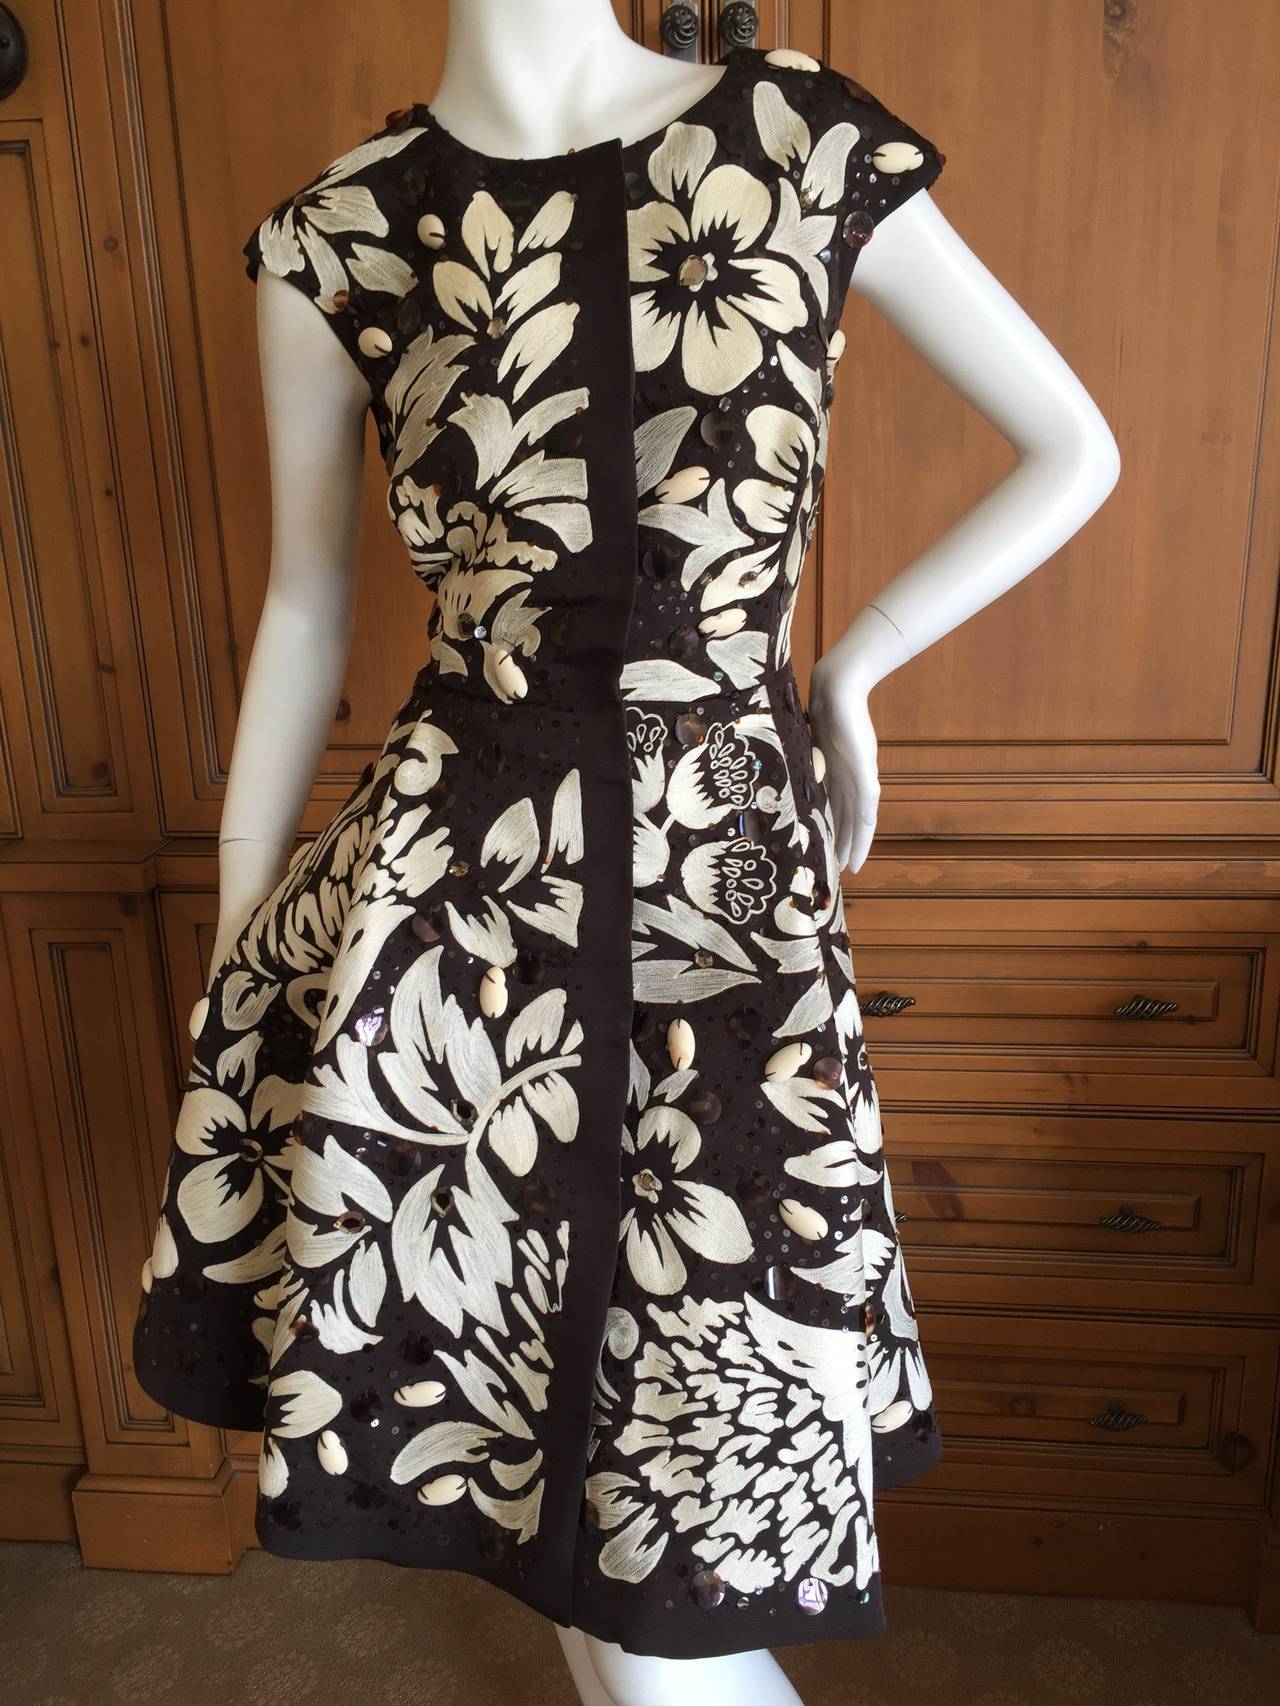 Exquisite Oscar de la Renta Black & White Floral Embroidered Dress.
The flowers on this are all embroidered, please see detail photos.